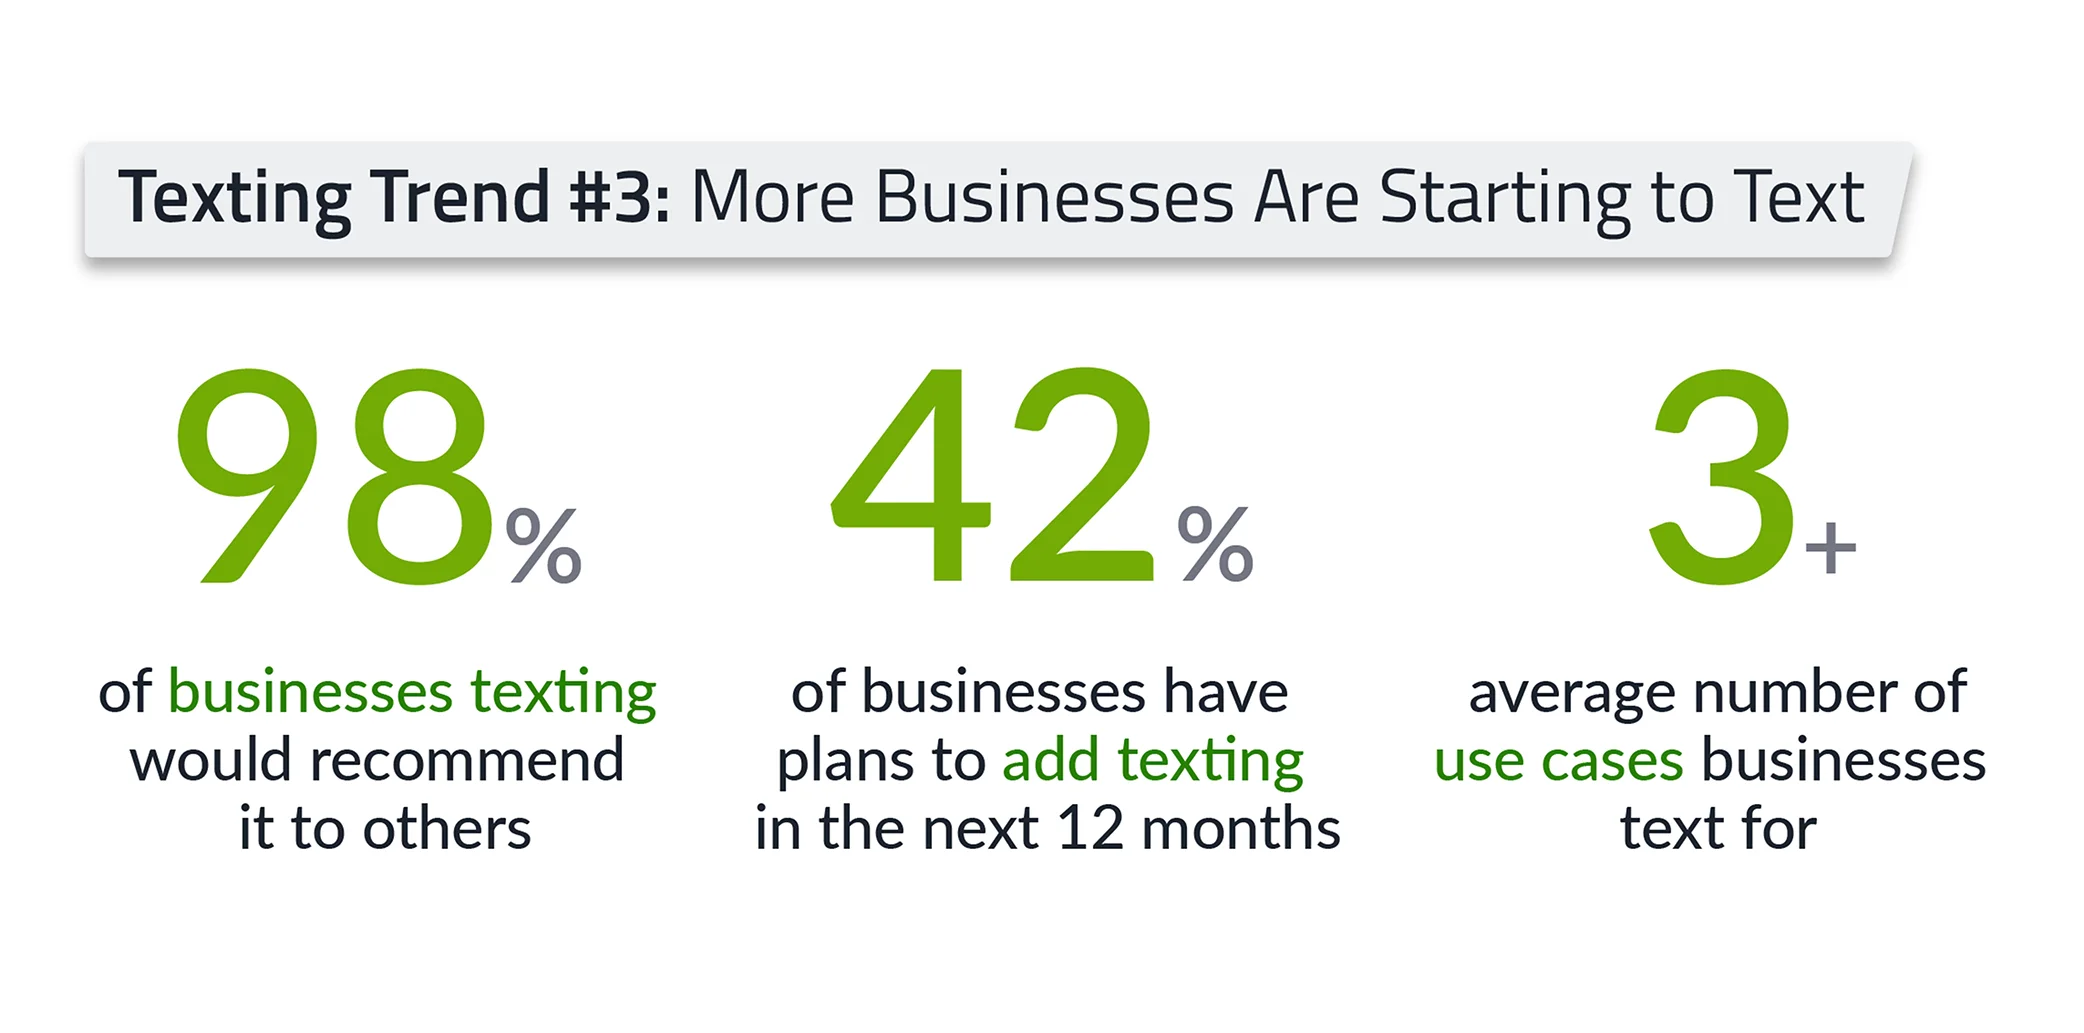 text-messaging-trend-more-businesses-are-texting